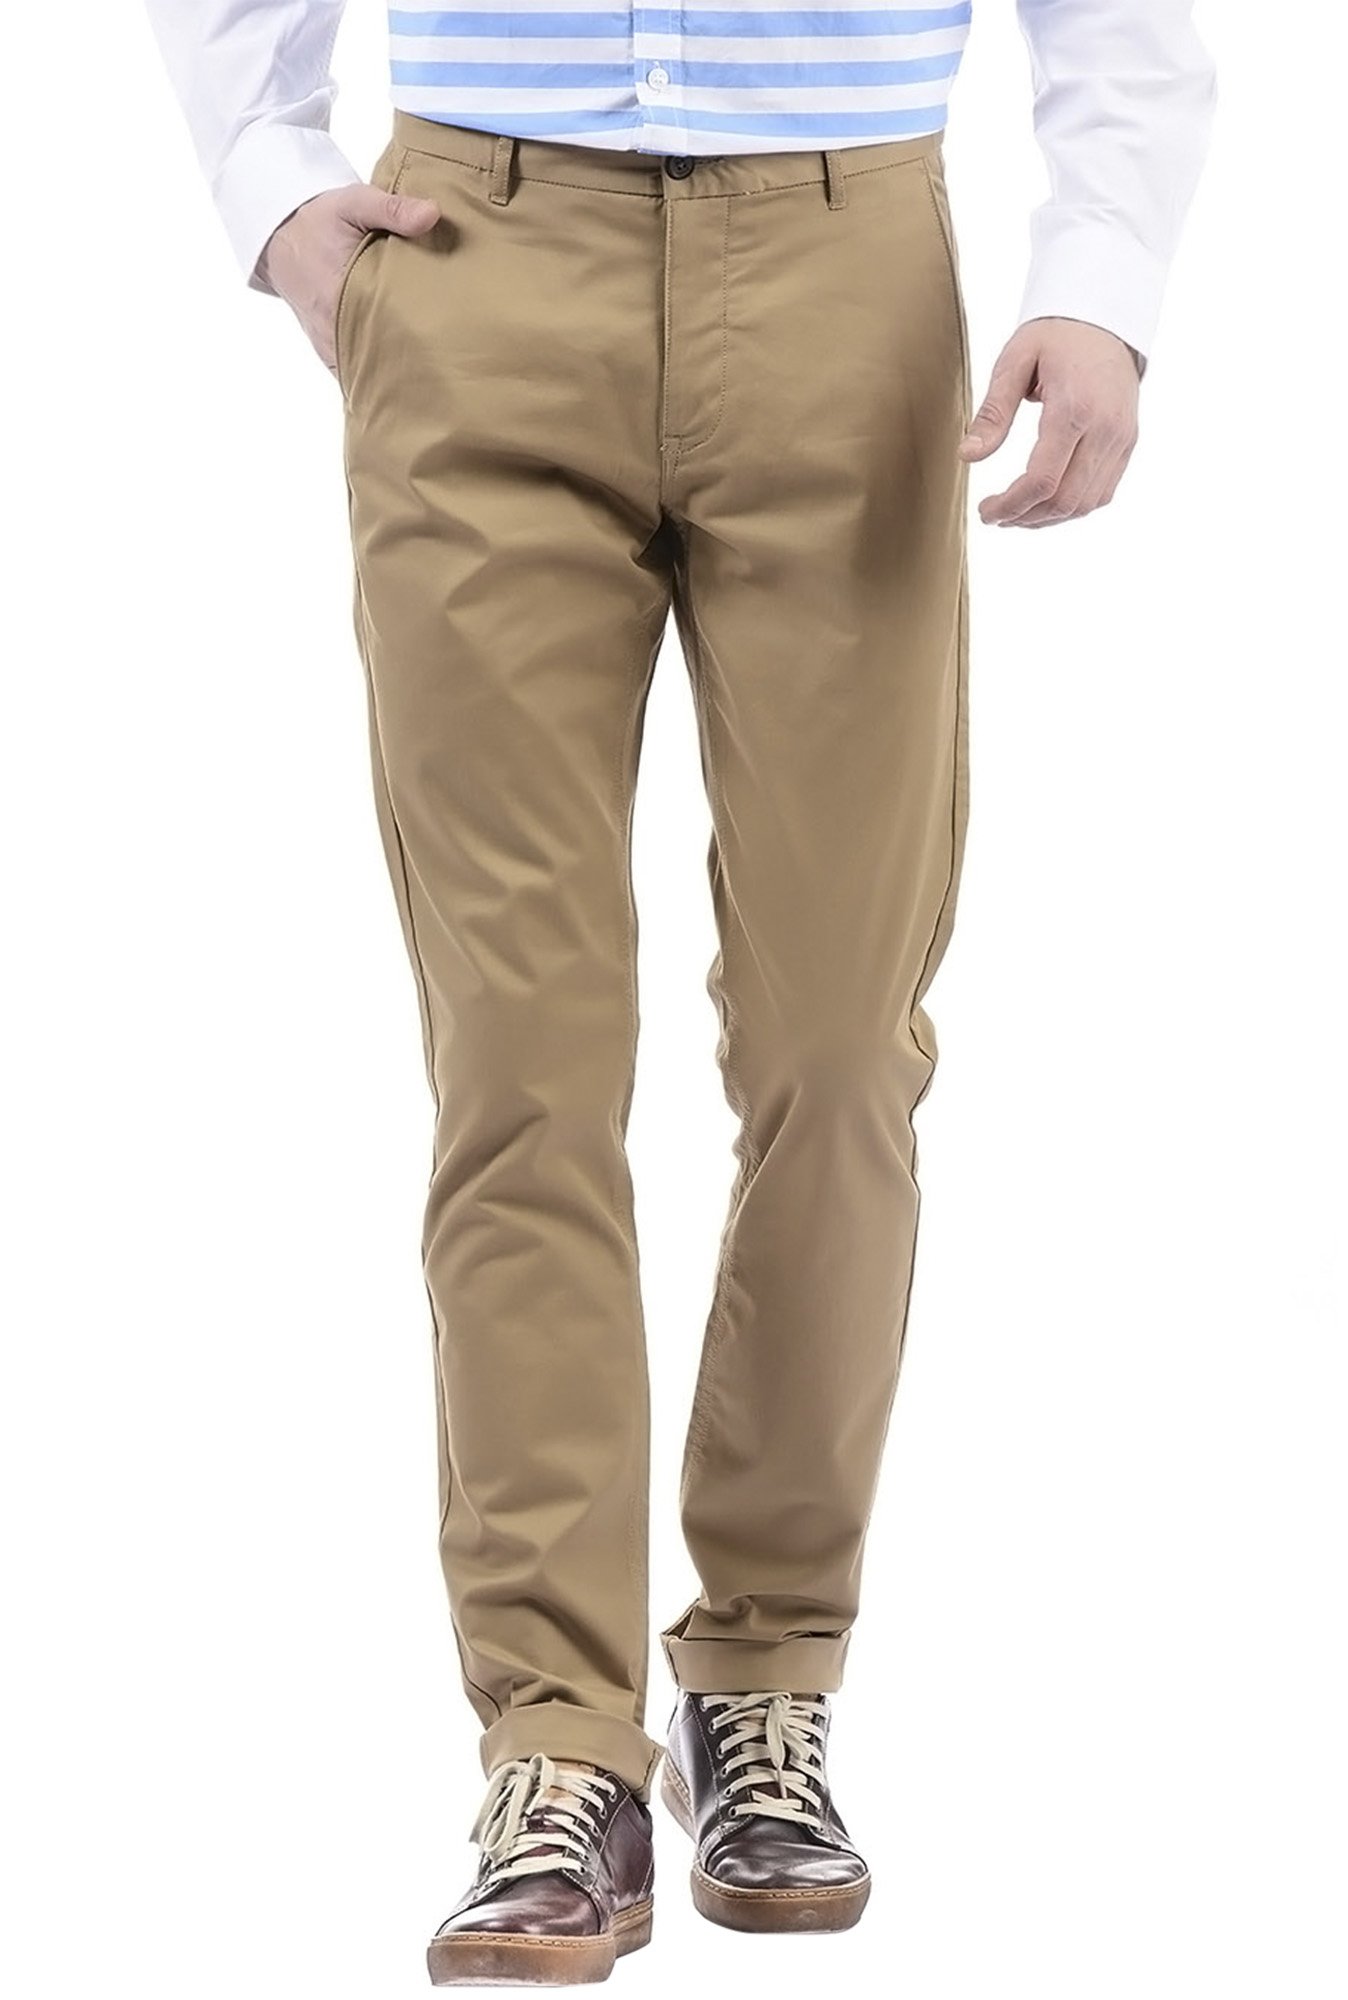 Jeans & Pants | Indian Terrain Cotton Chinos | Freeup